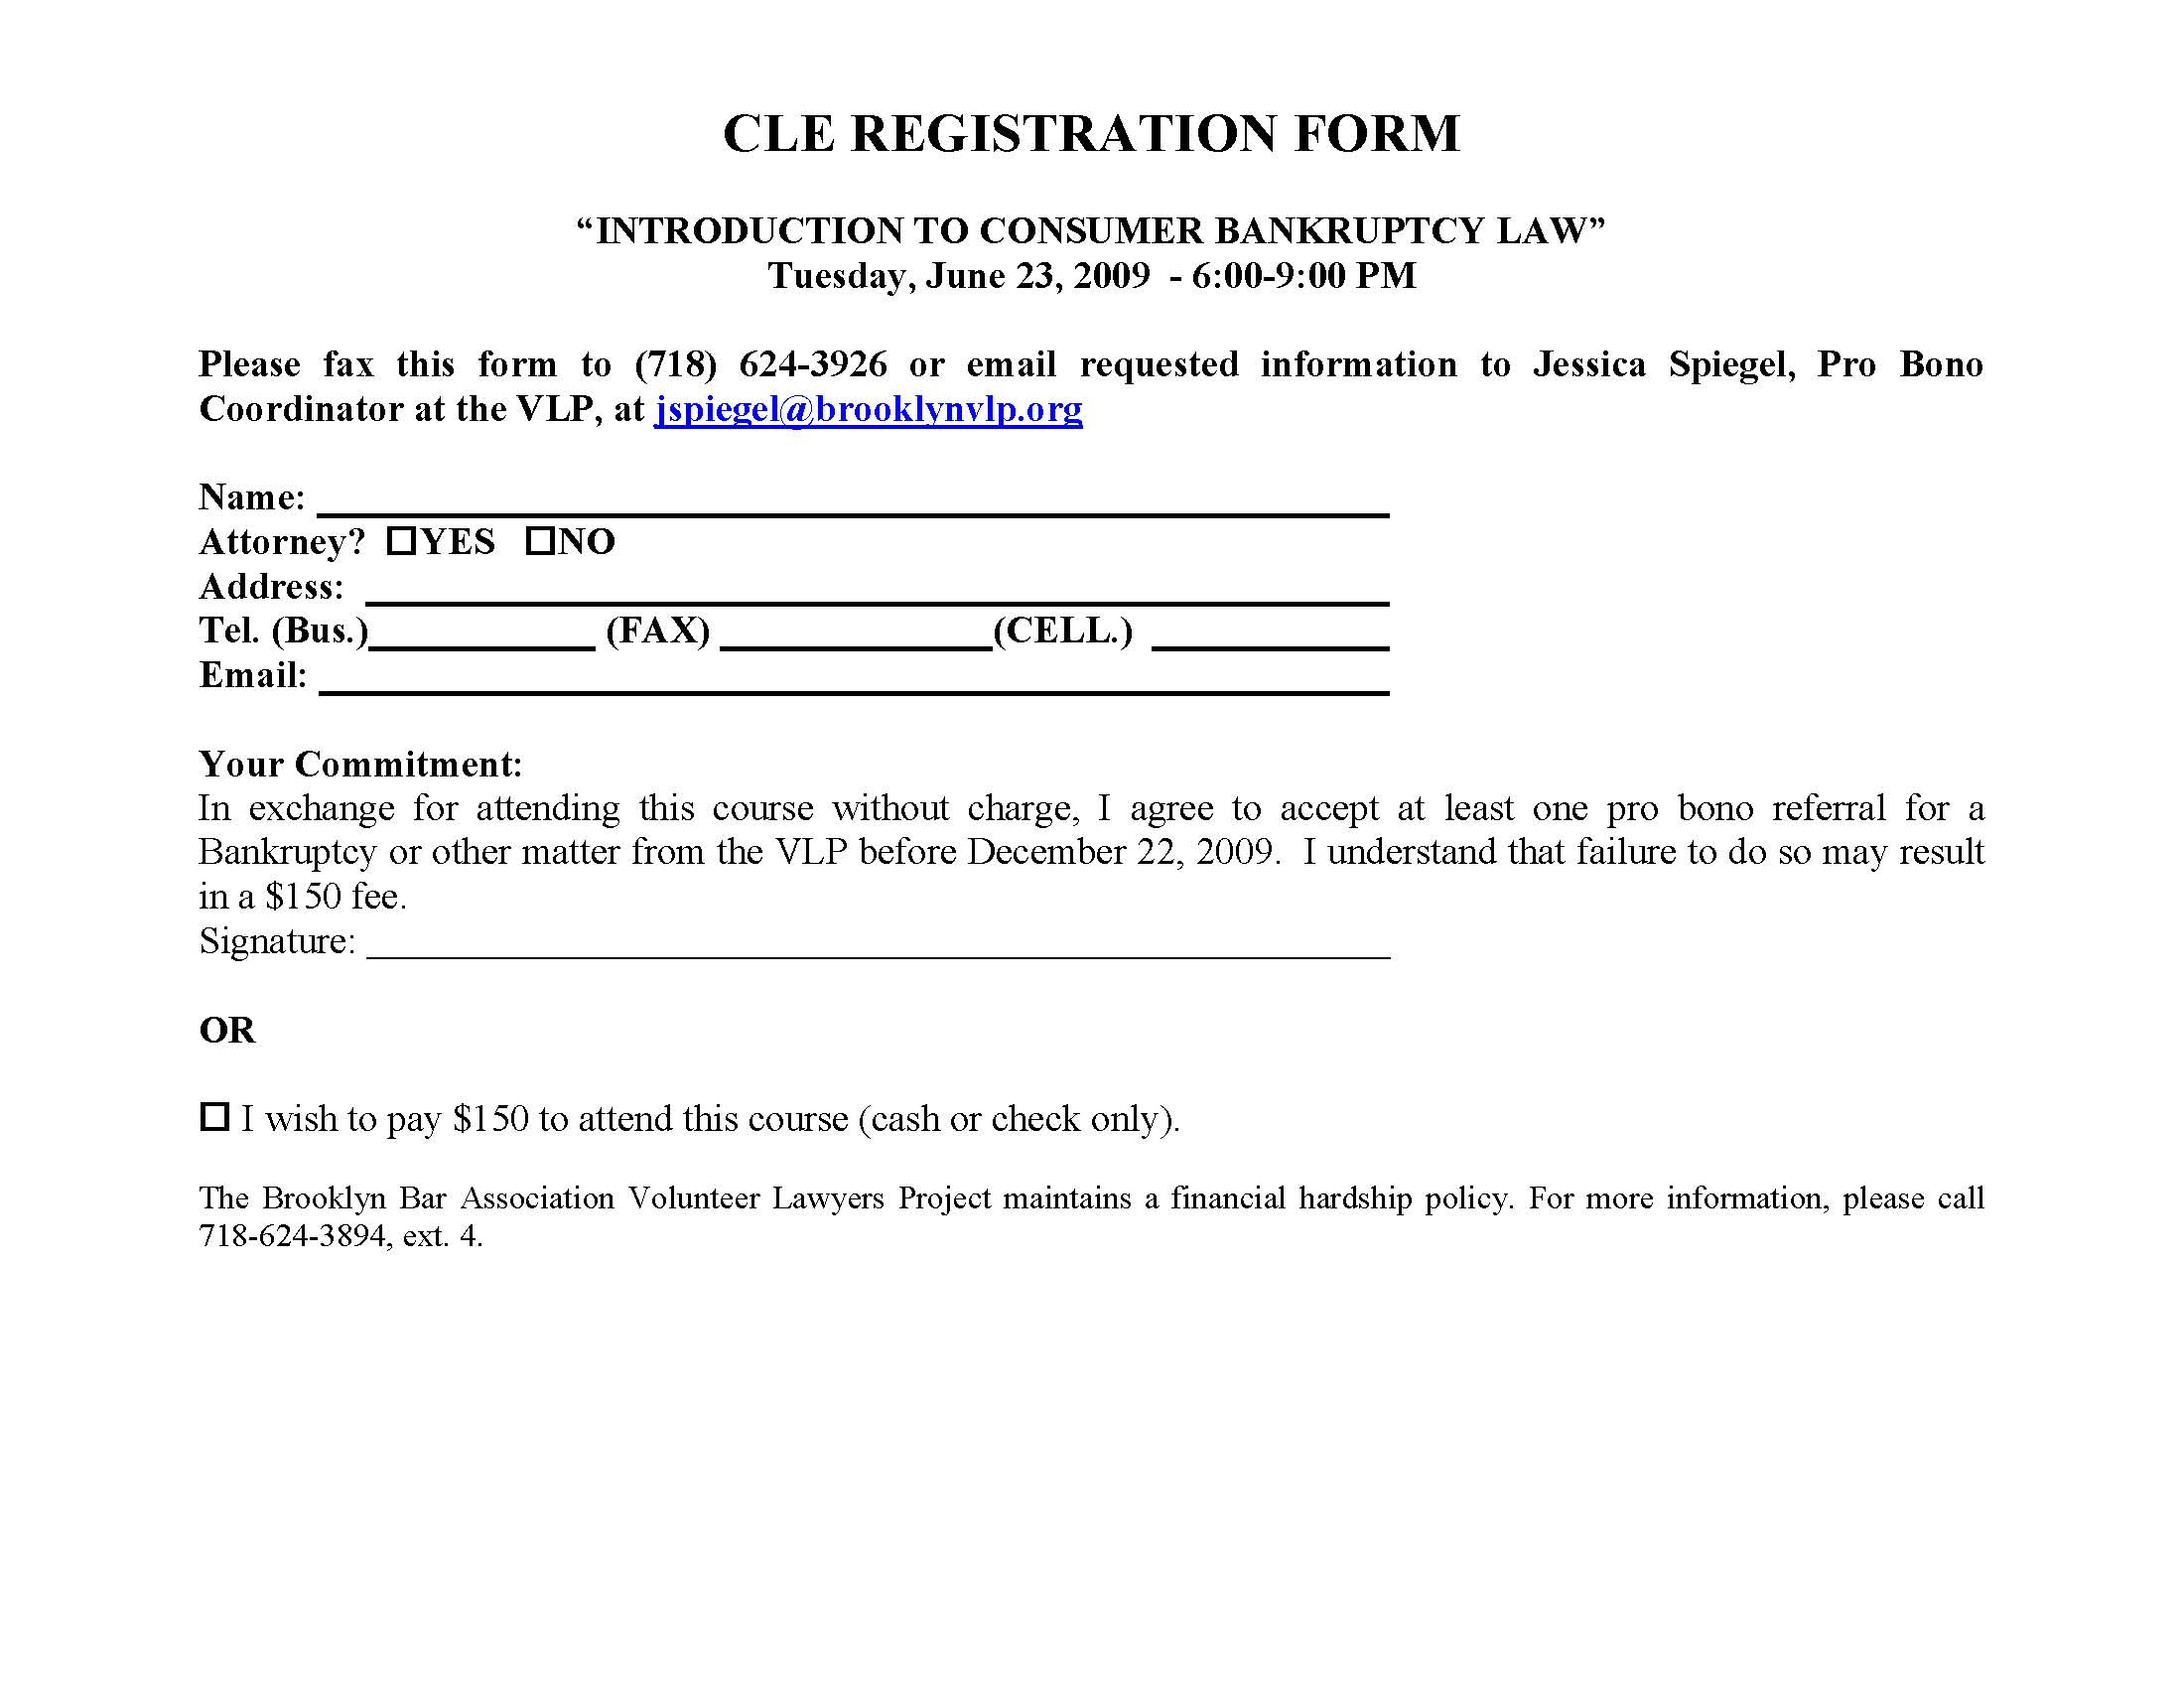 Introduction to Bankruptcy Registration Flyer-1_Page_2